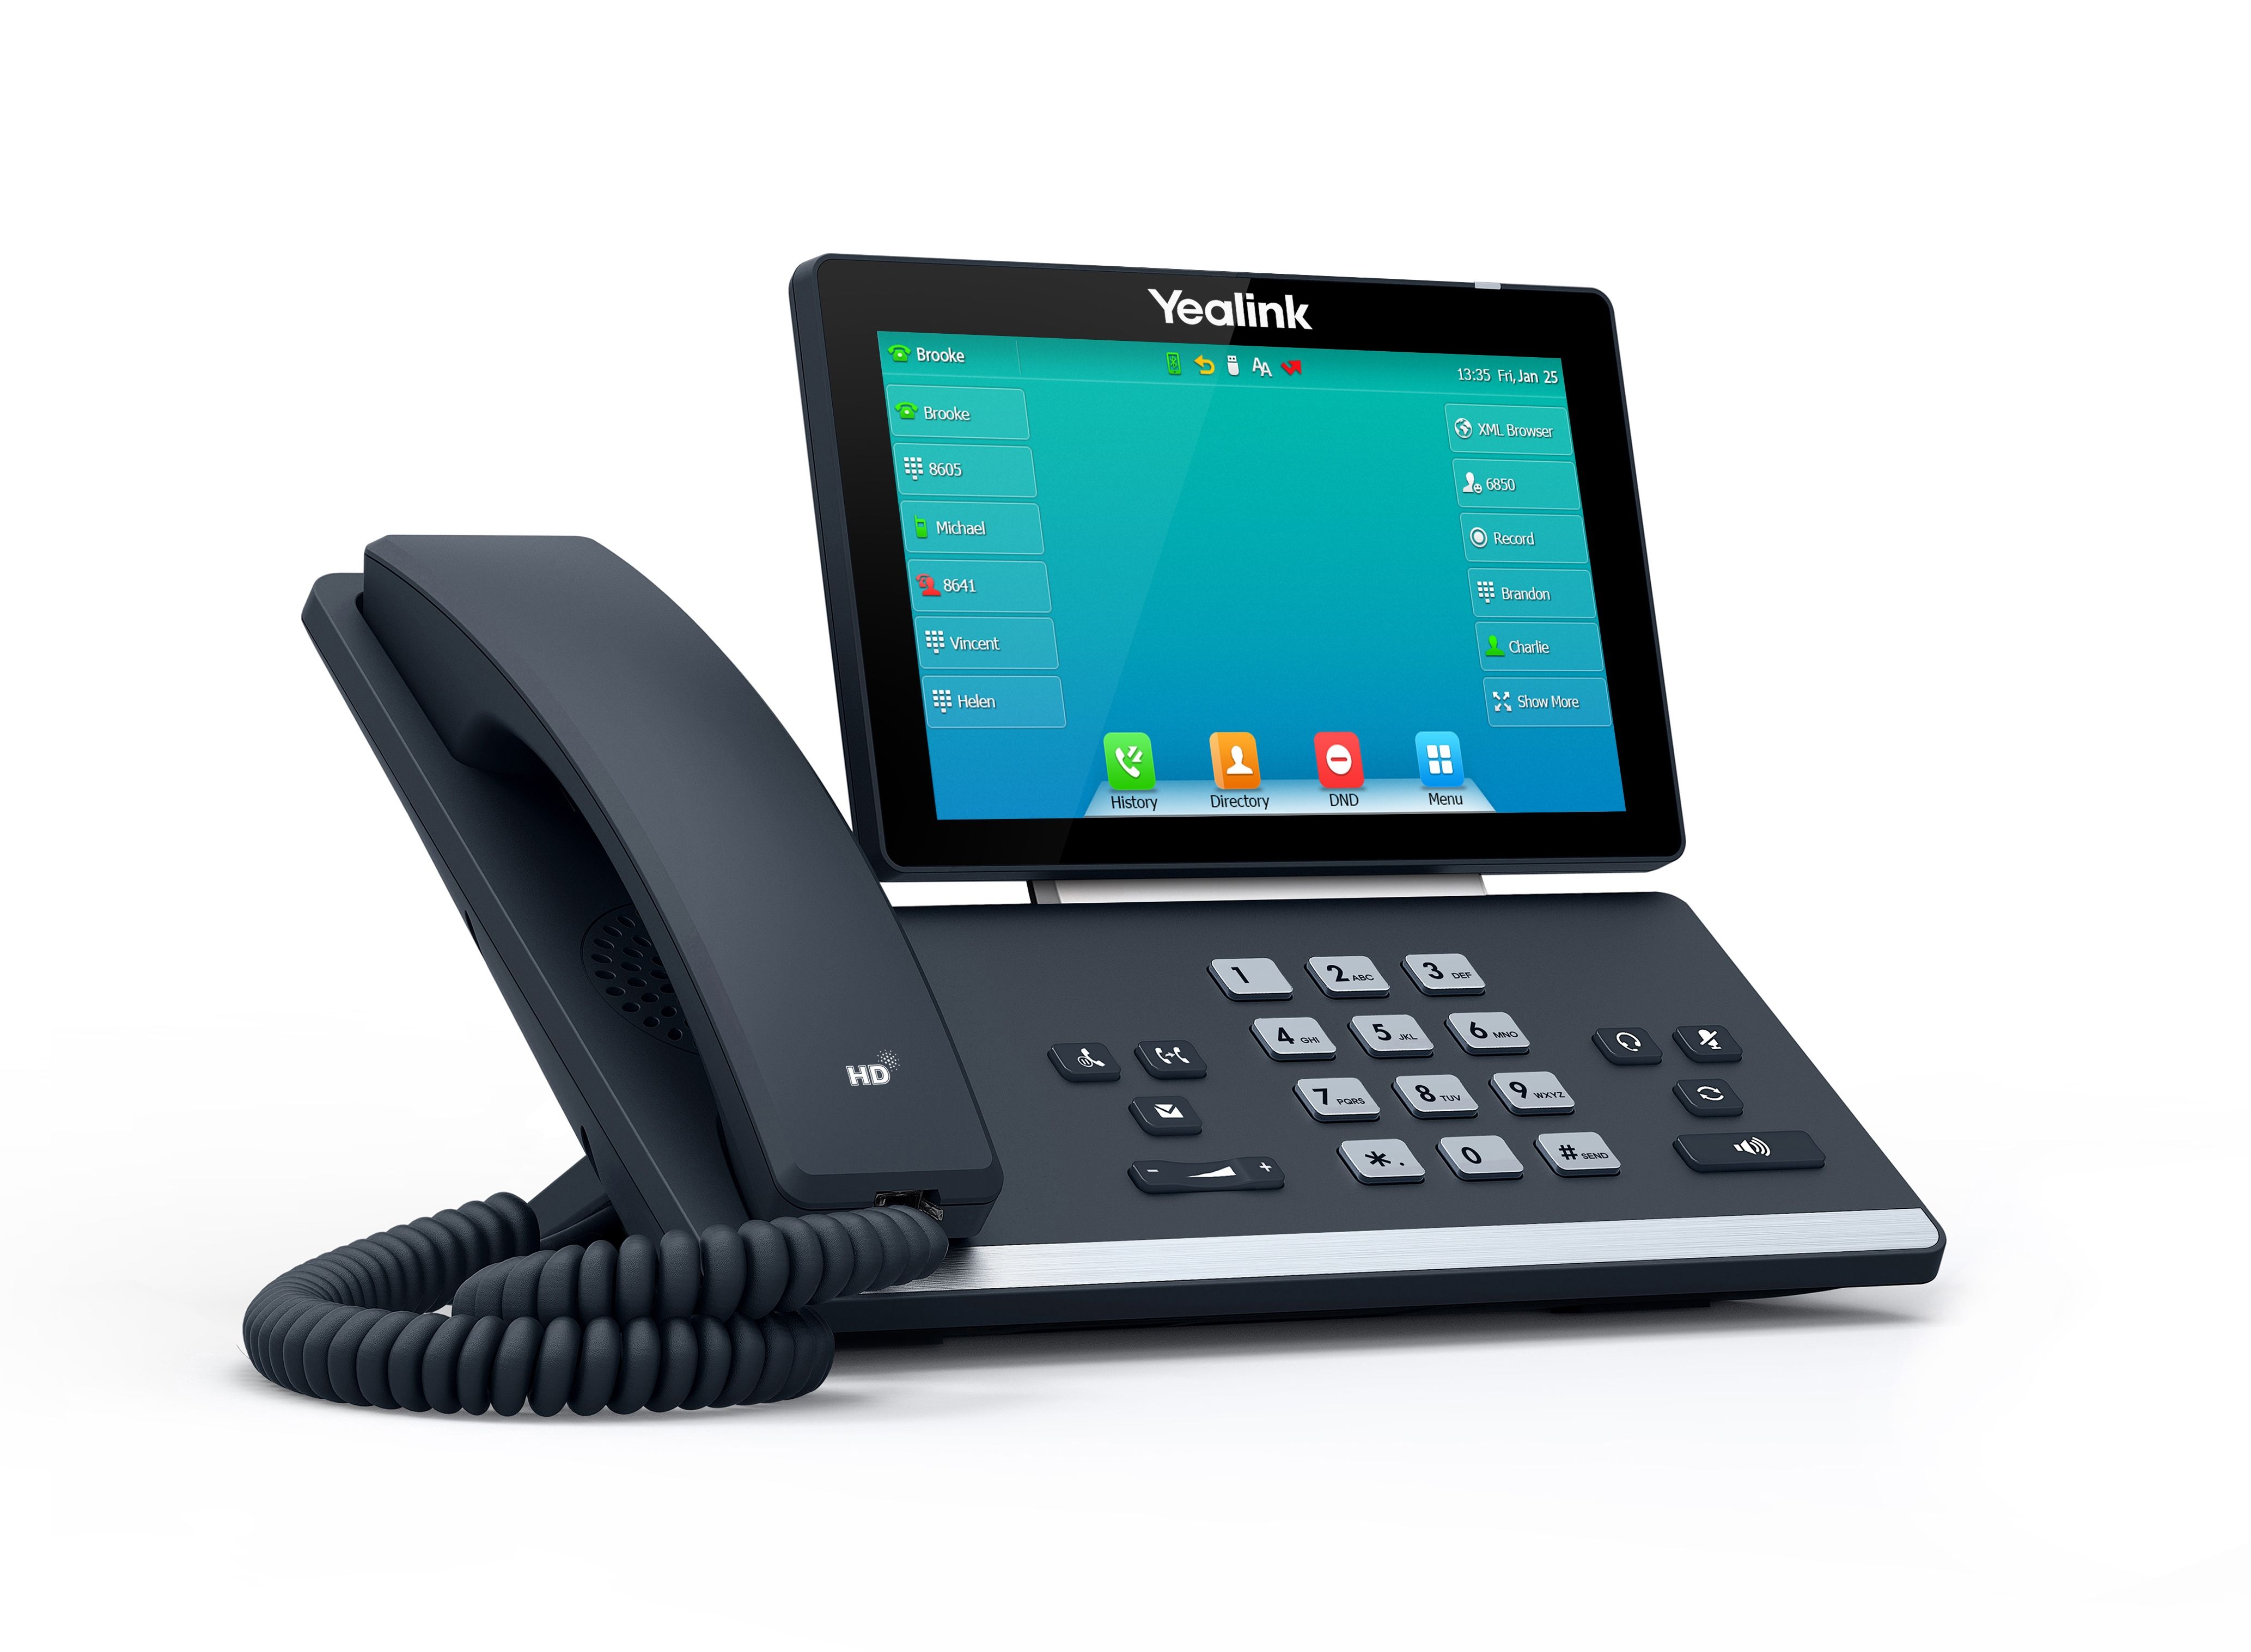 Yealink T57W Premium IP Phone w/ built-in Bluetooth and Wi-Fi